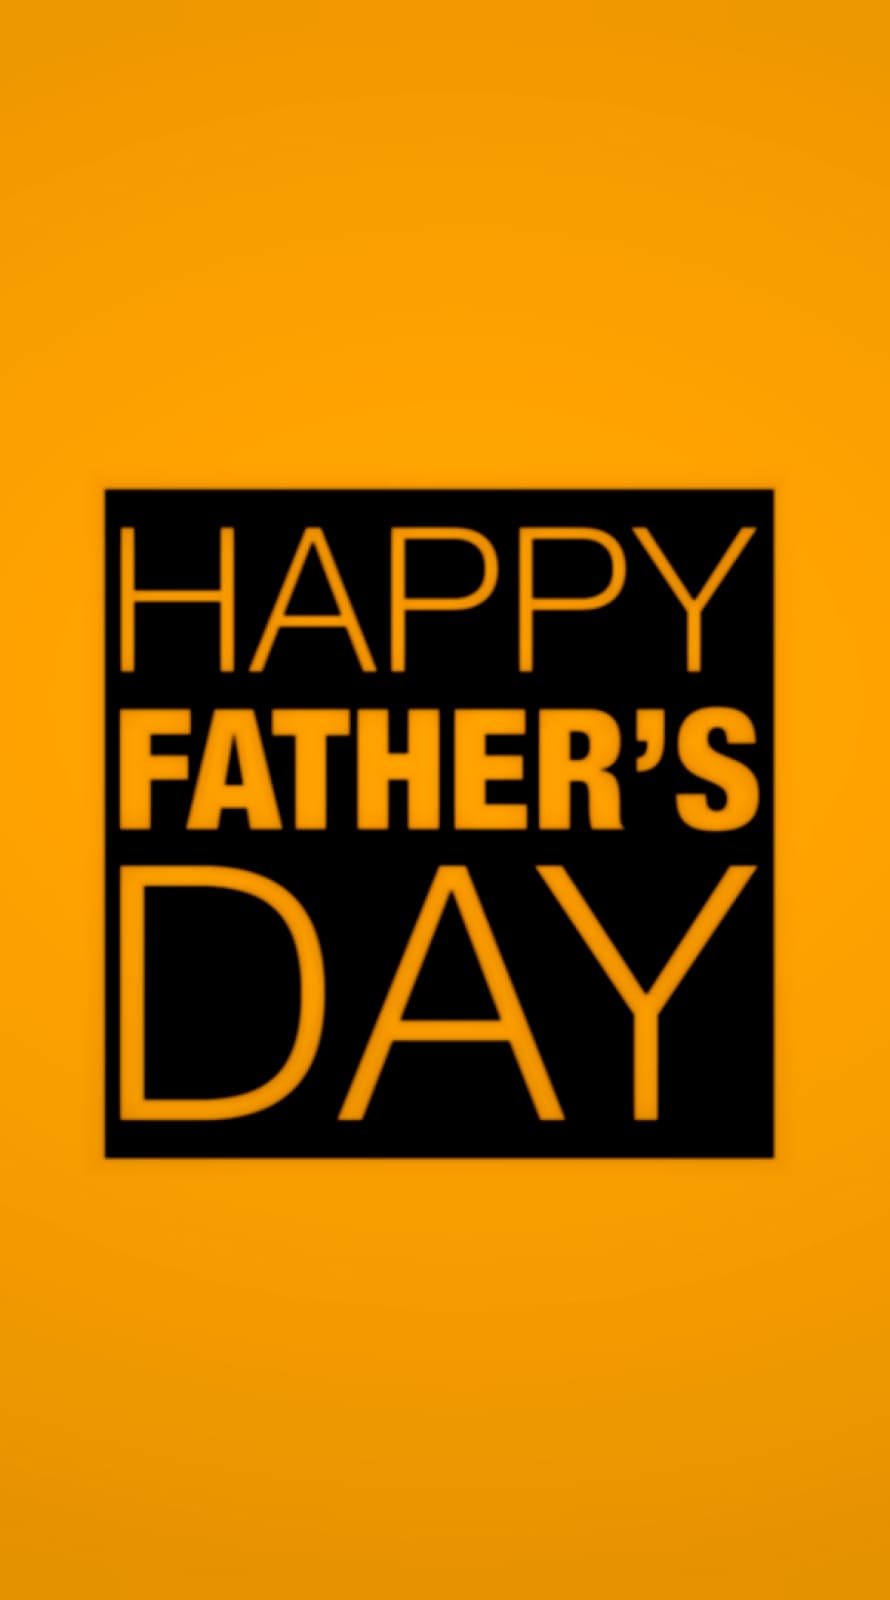 happy fathers day images 2022 iphone 13 wallpaper